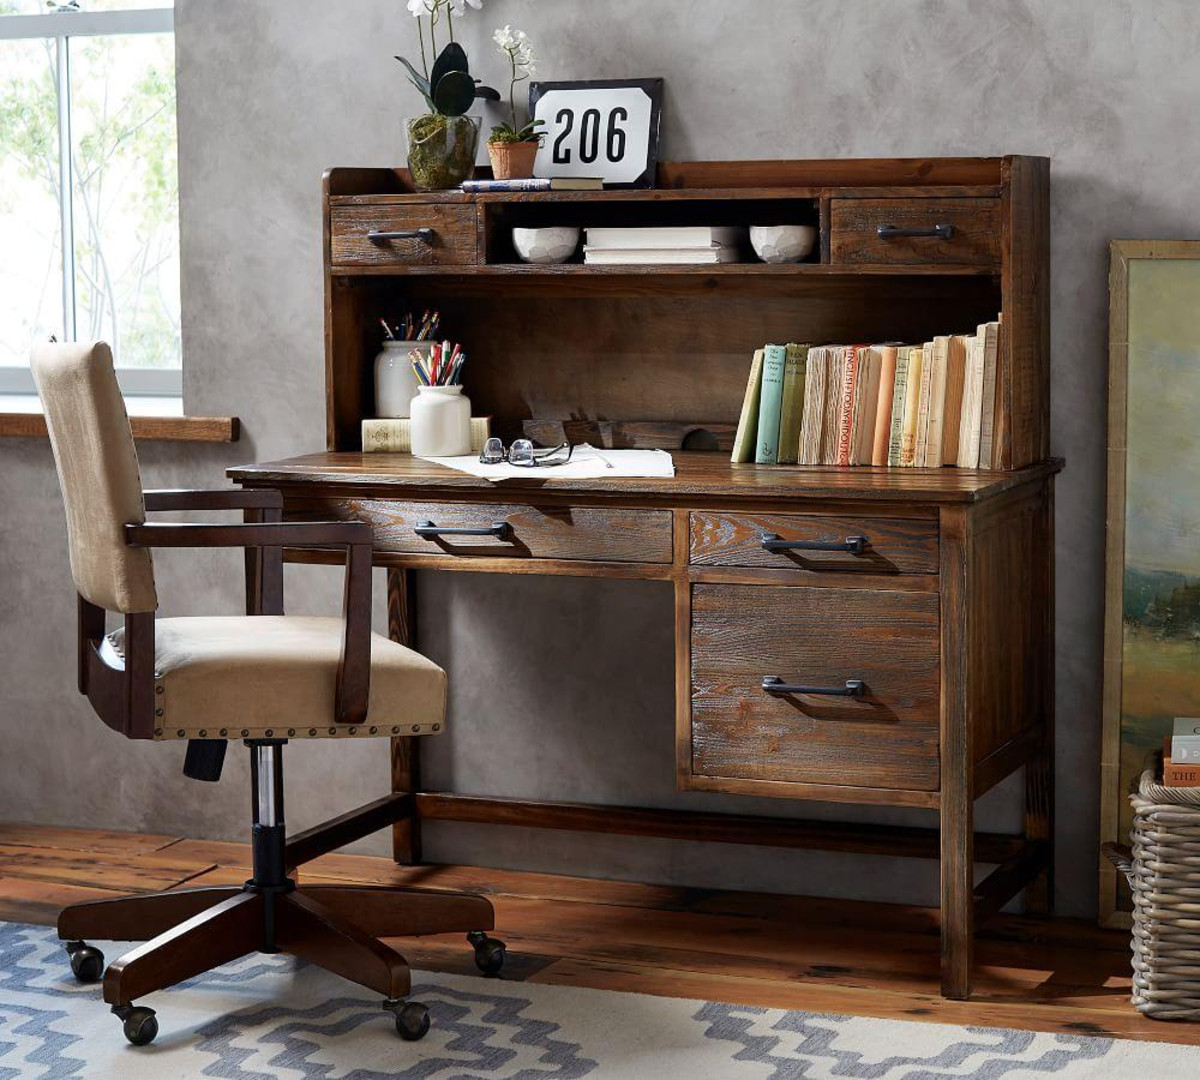 The Revival of Mid-century Office Furniture